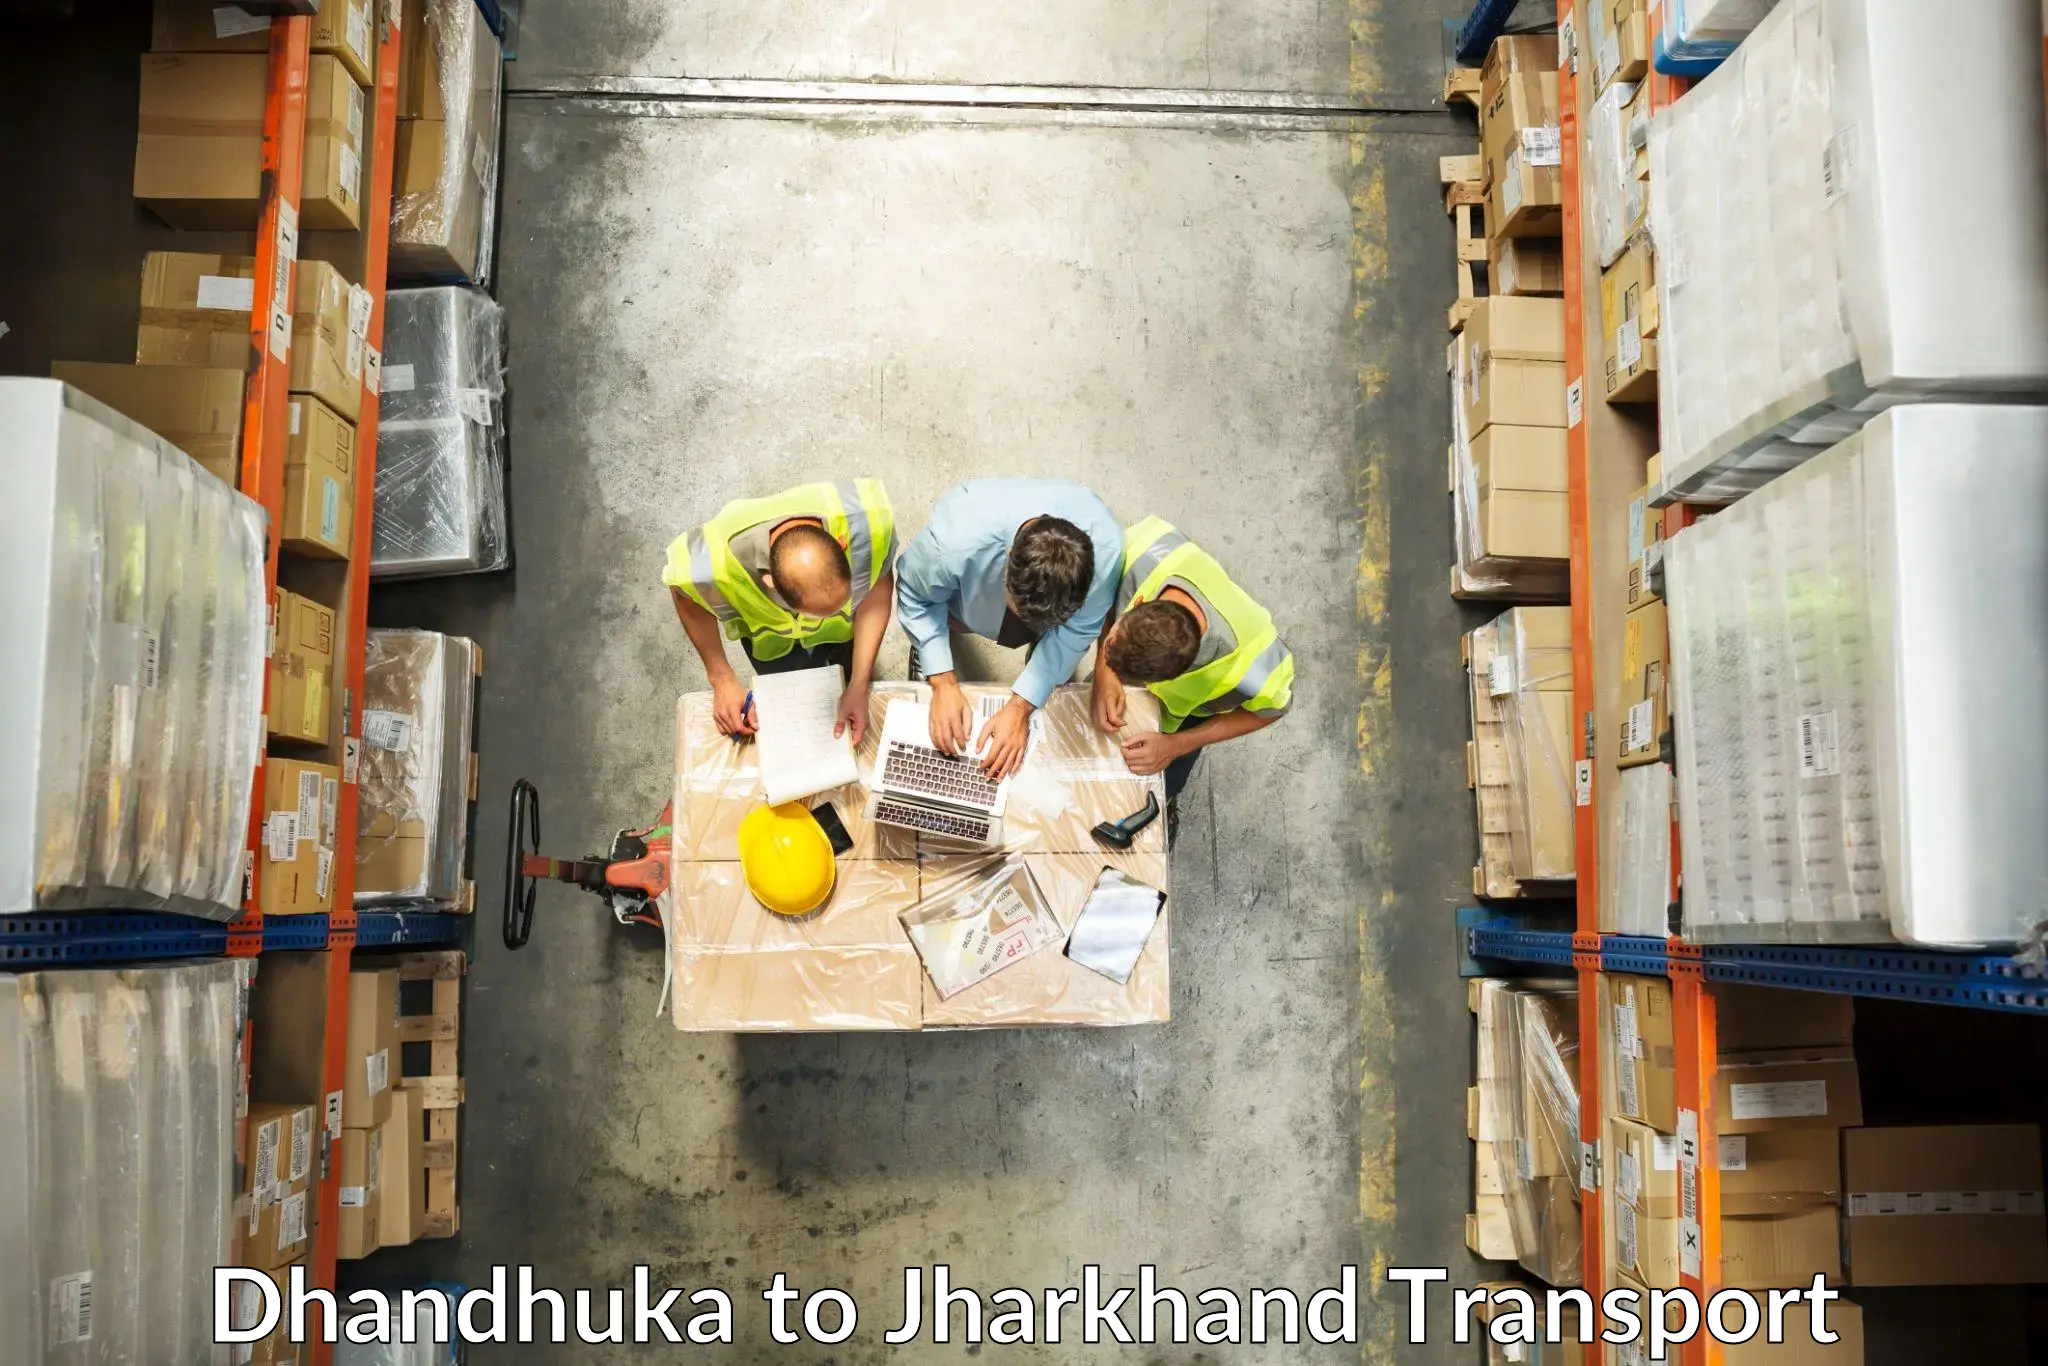 Part load transport service in India Dhandhuka to Peterbar